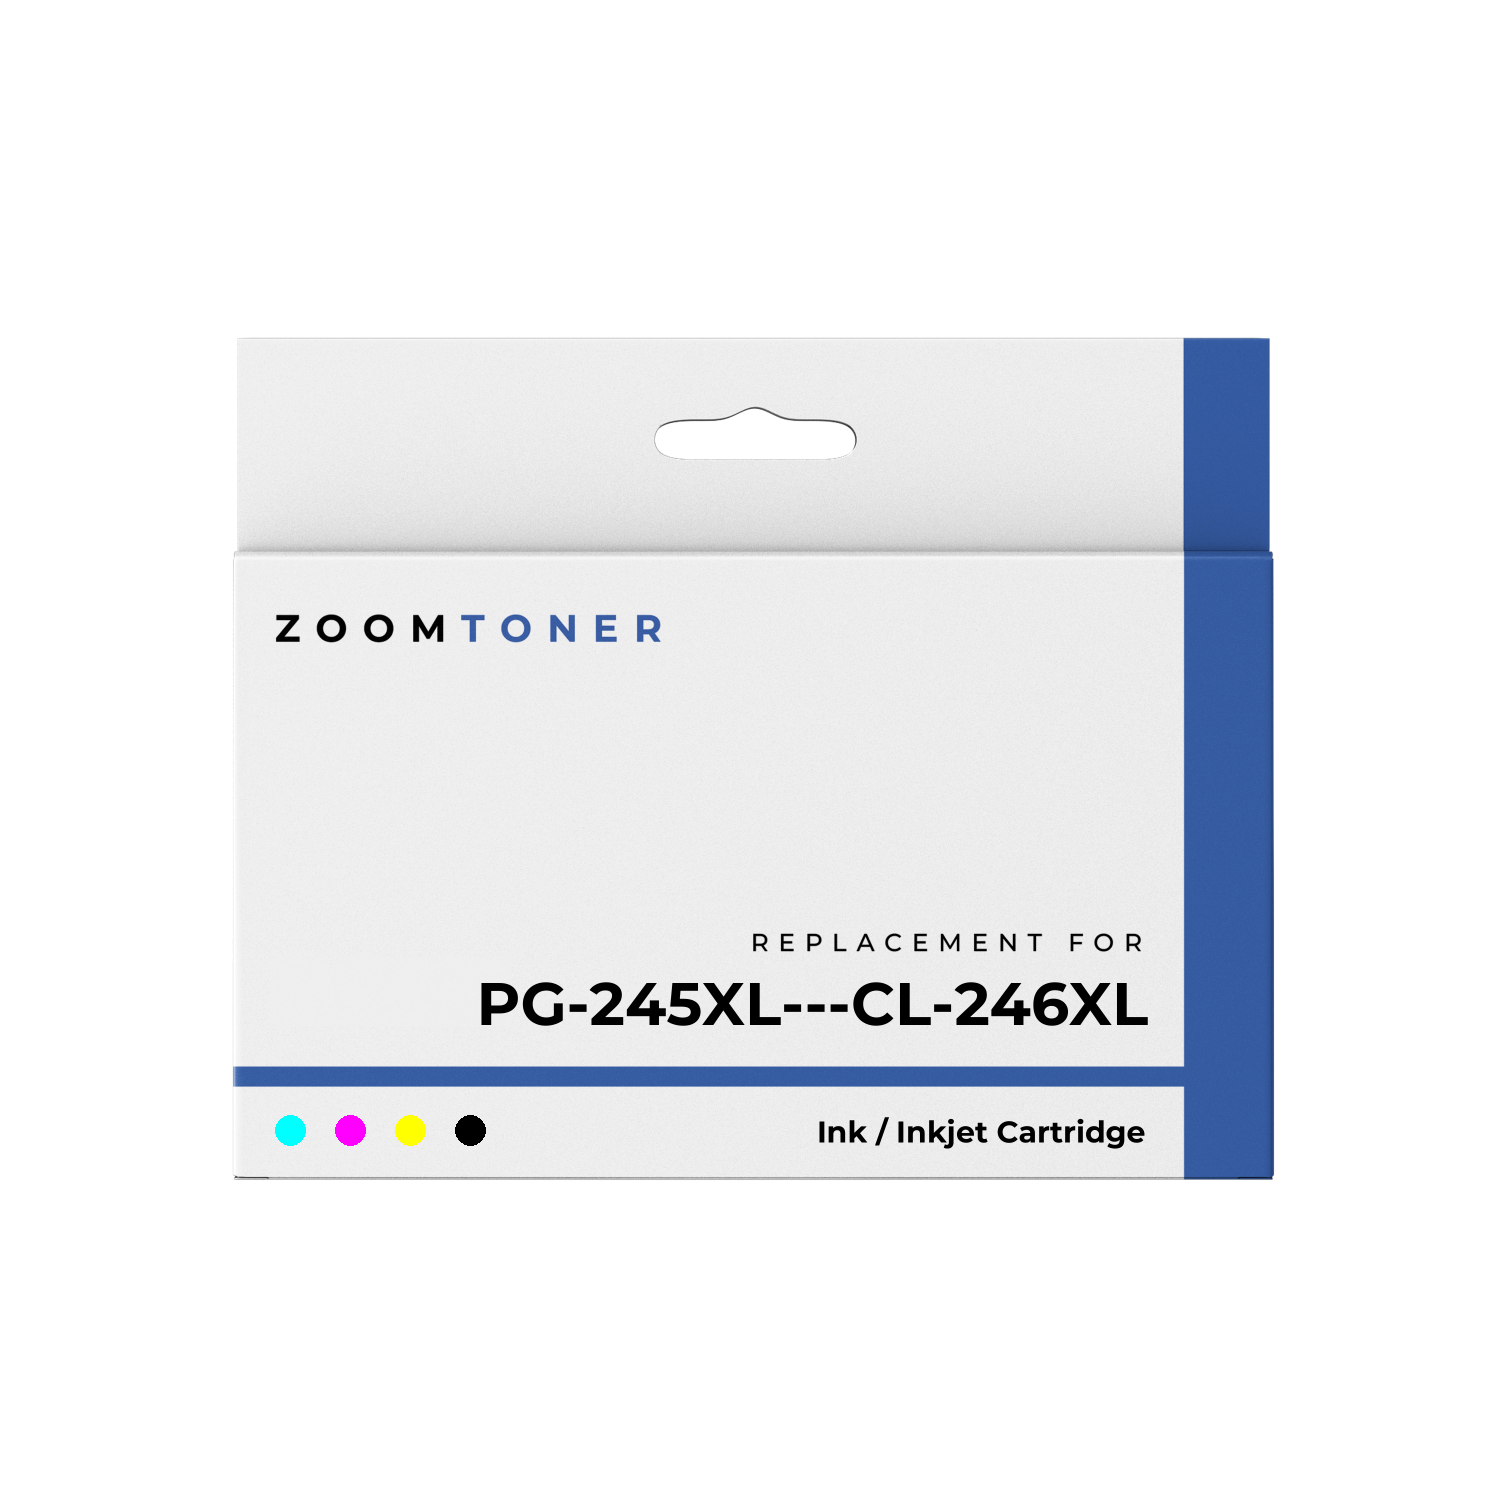 Zoomtoner Compatible CANON PG-245XL / CL-246XL Ink / Inkjet Cartridge Black Tri-Color High Yield Combo